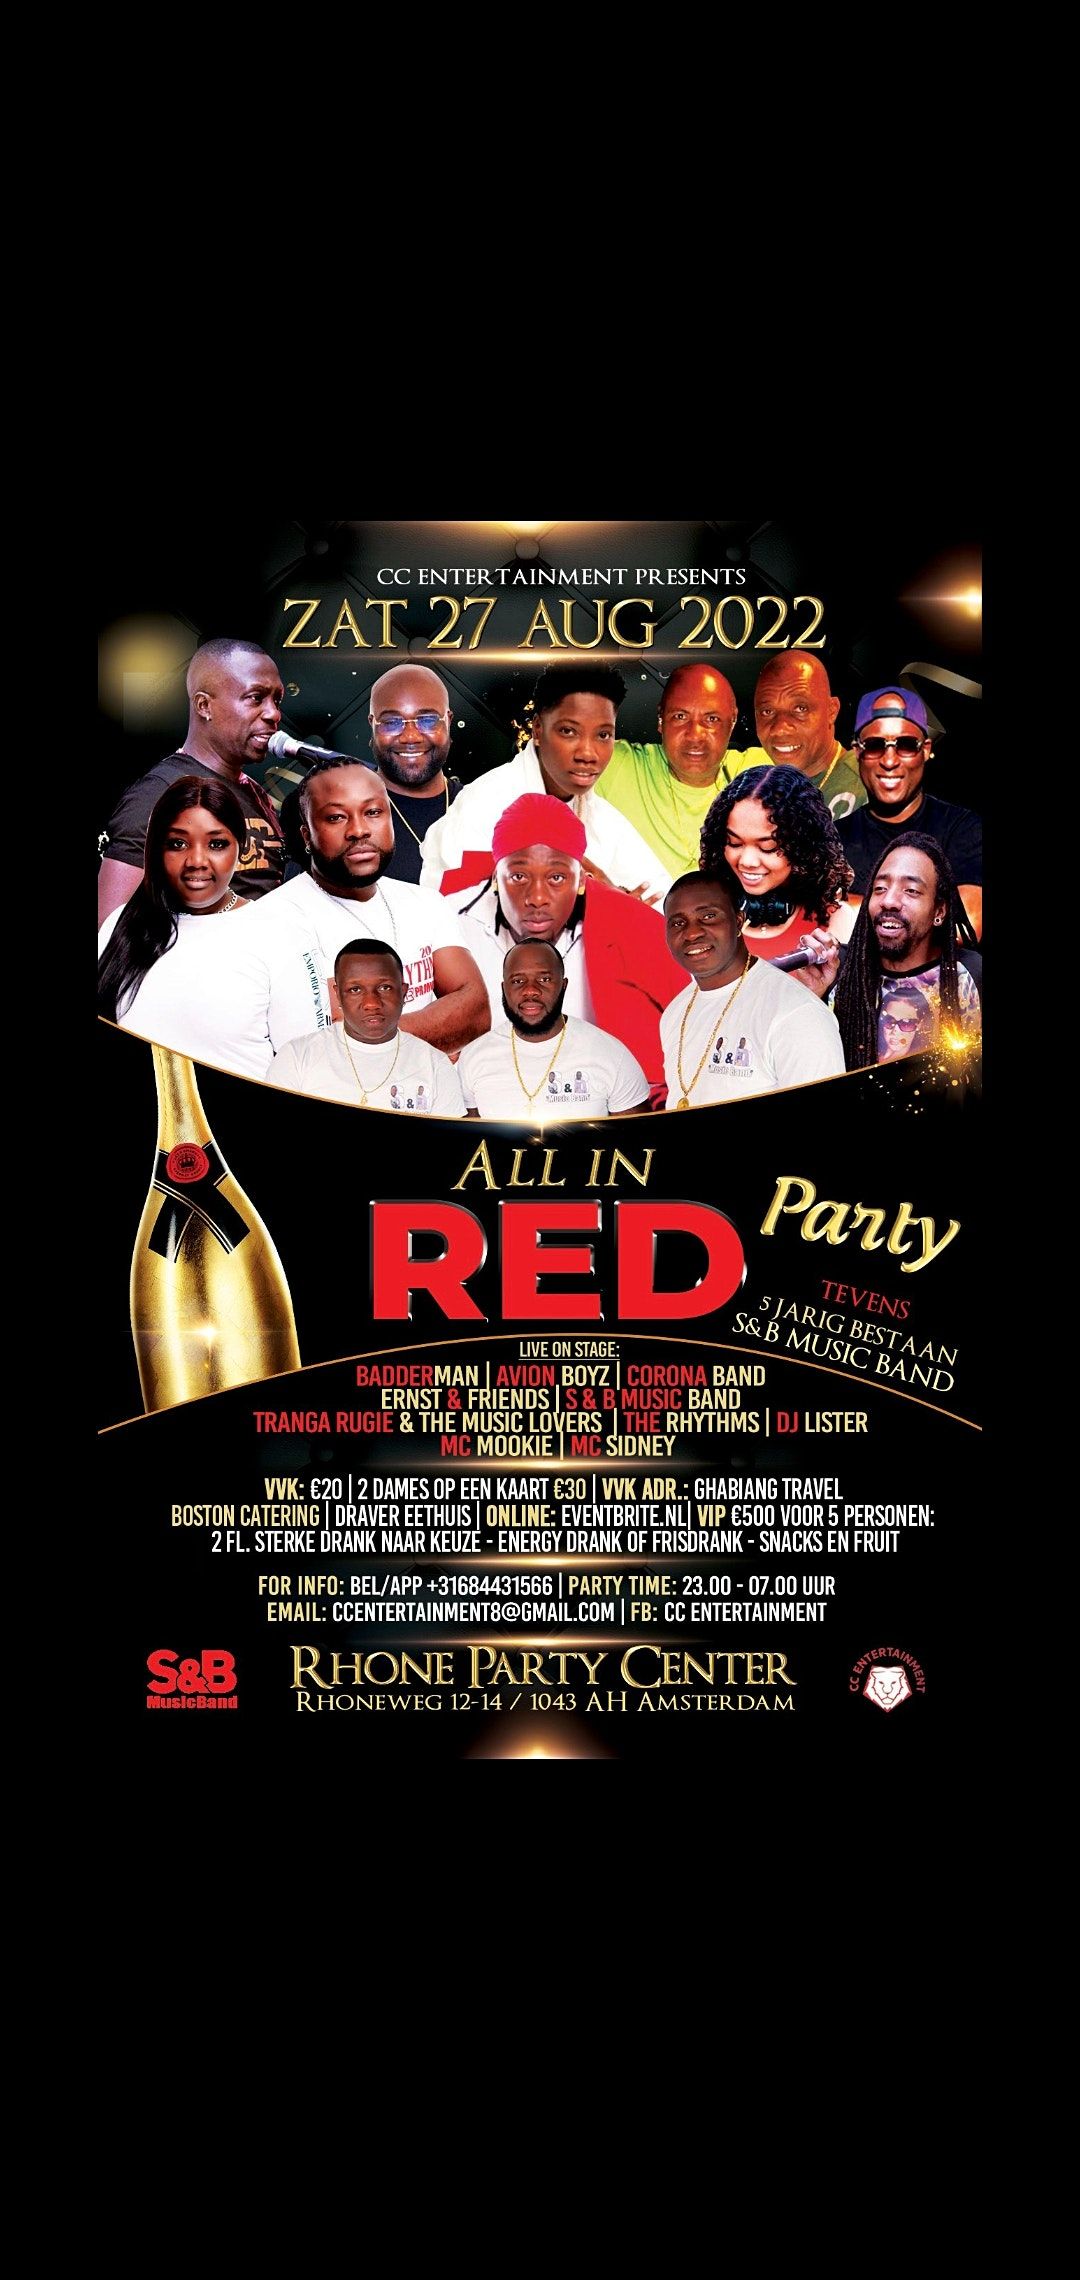 ALL IN RED PARTY